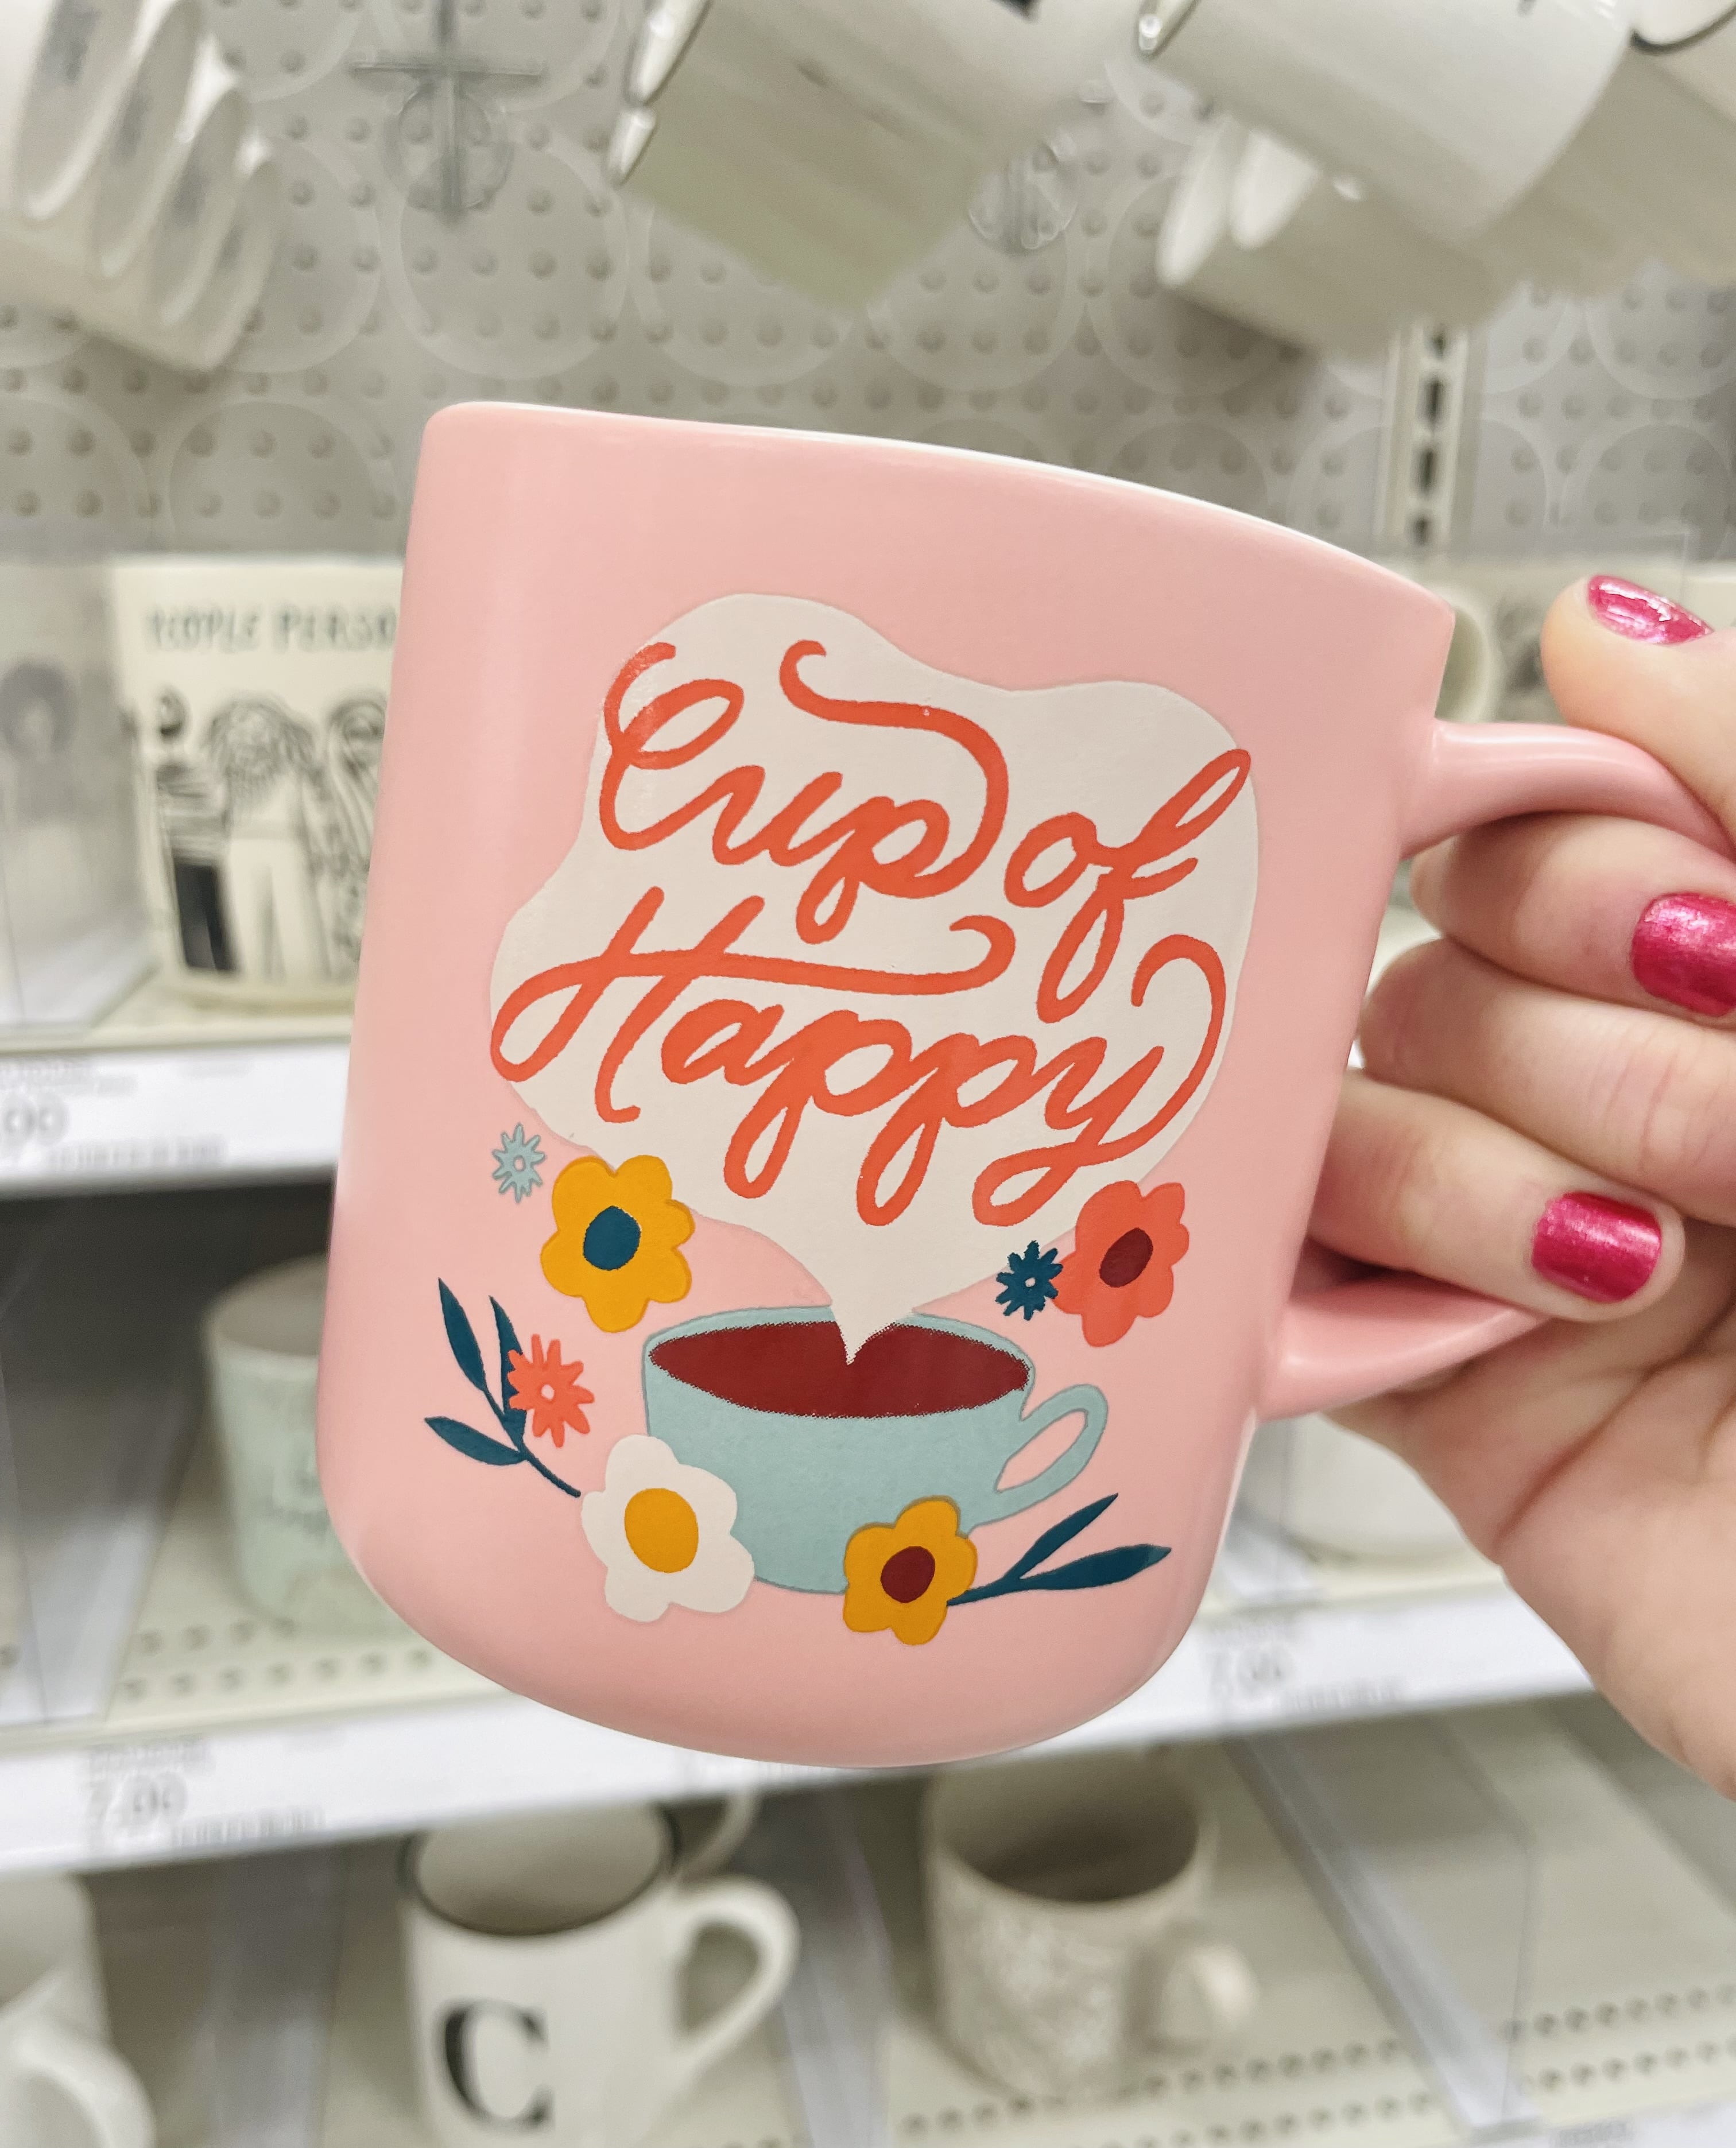 New Products at Target: February Arrivals Shopping Haul 2022